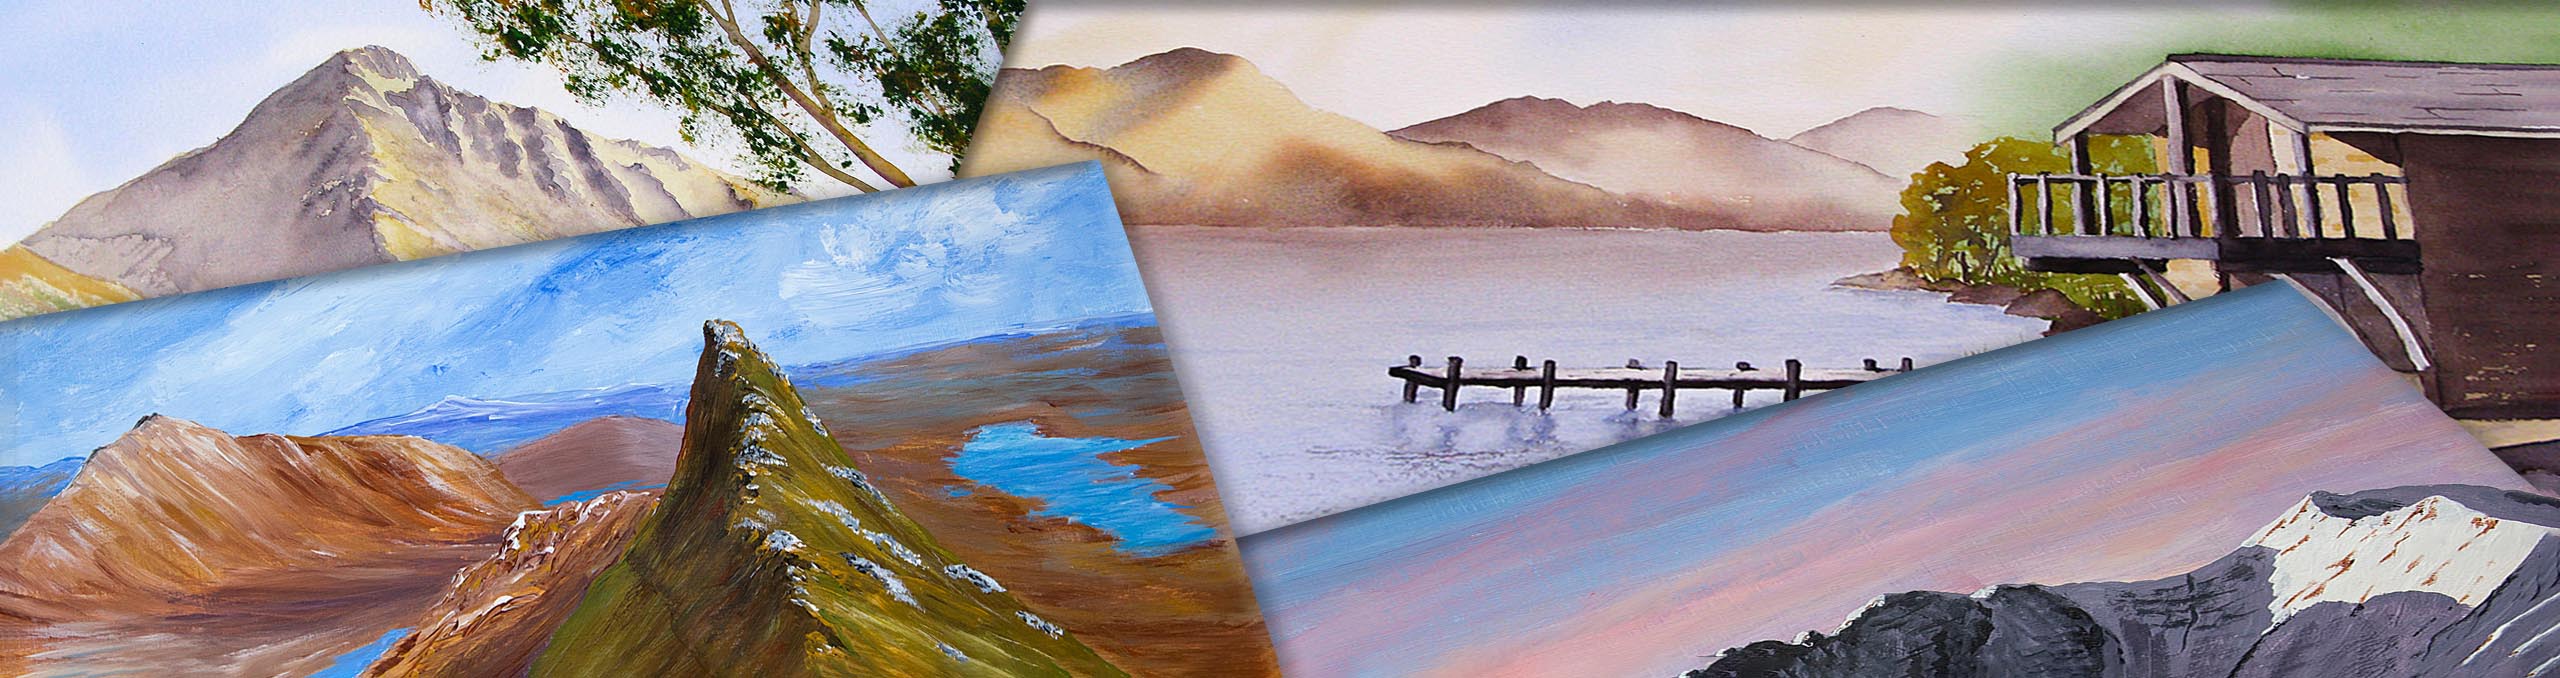 Orignal Landscape Paintings and Mountain Art by Sandra Hugill